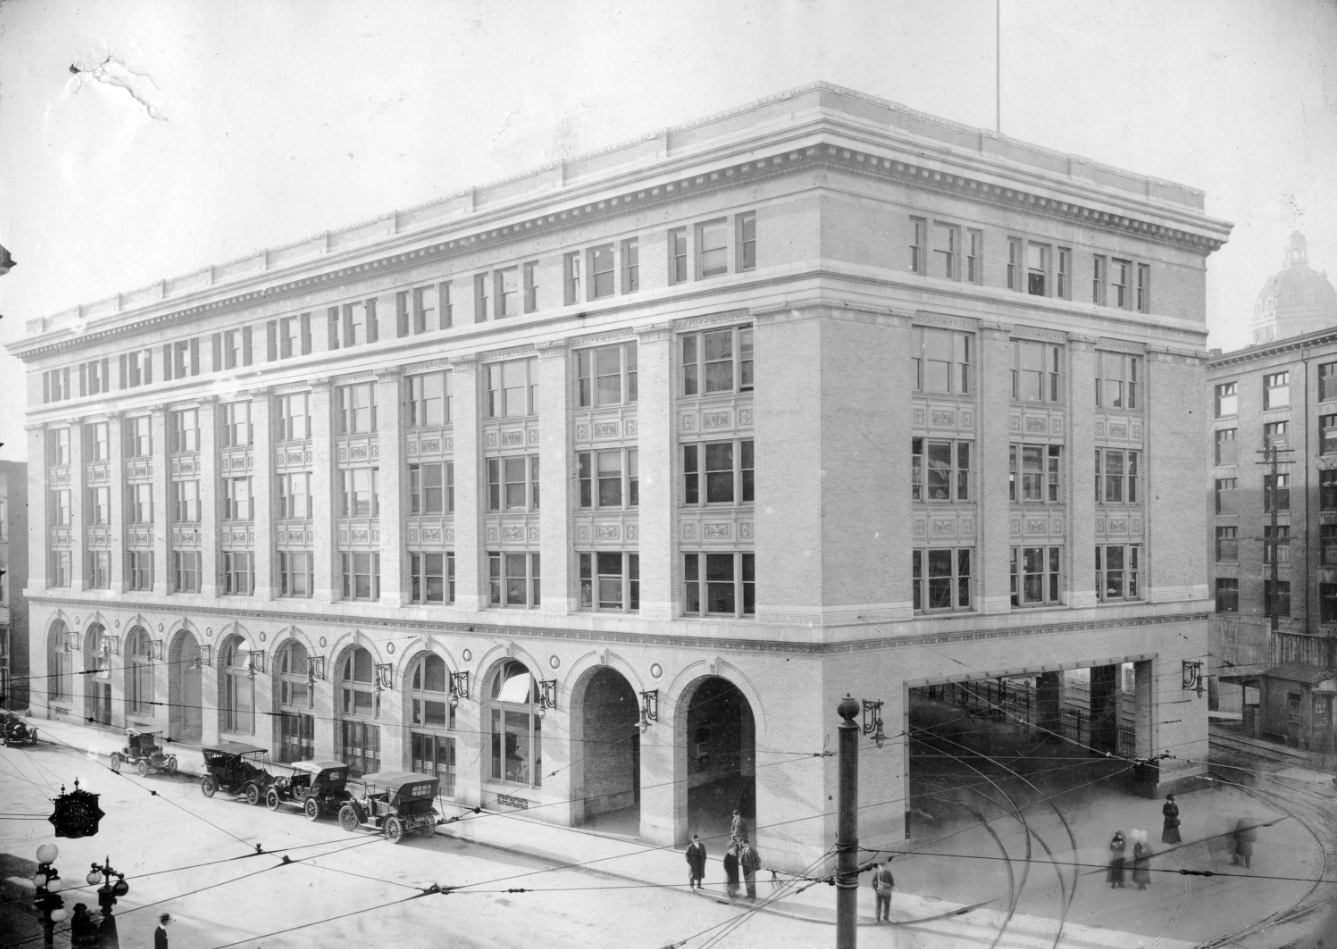 BCER terminal at Hastings and Carrall in 1912. CVA M-14-71